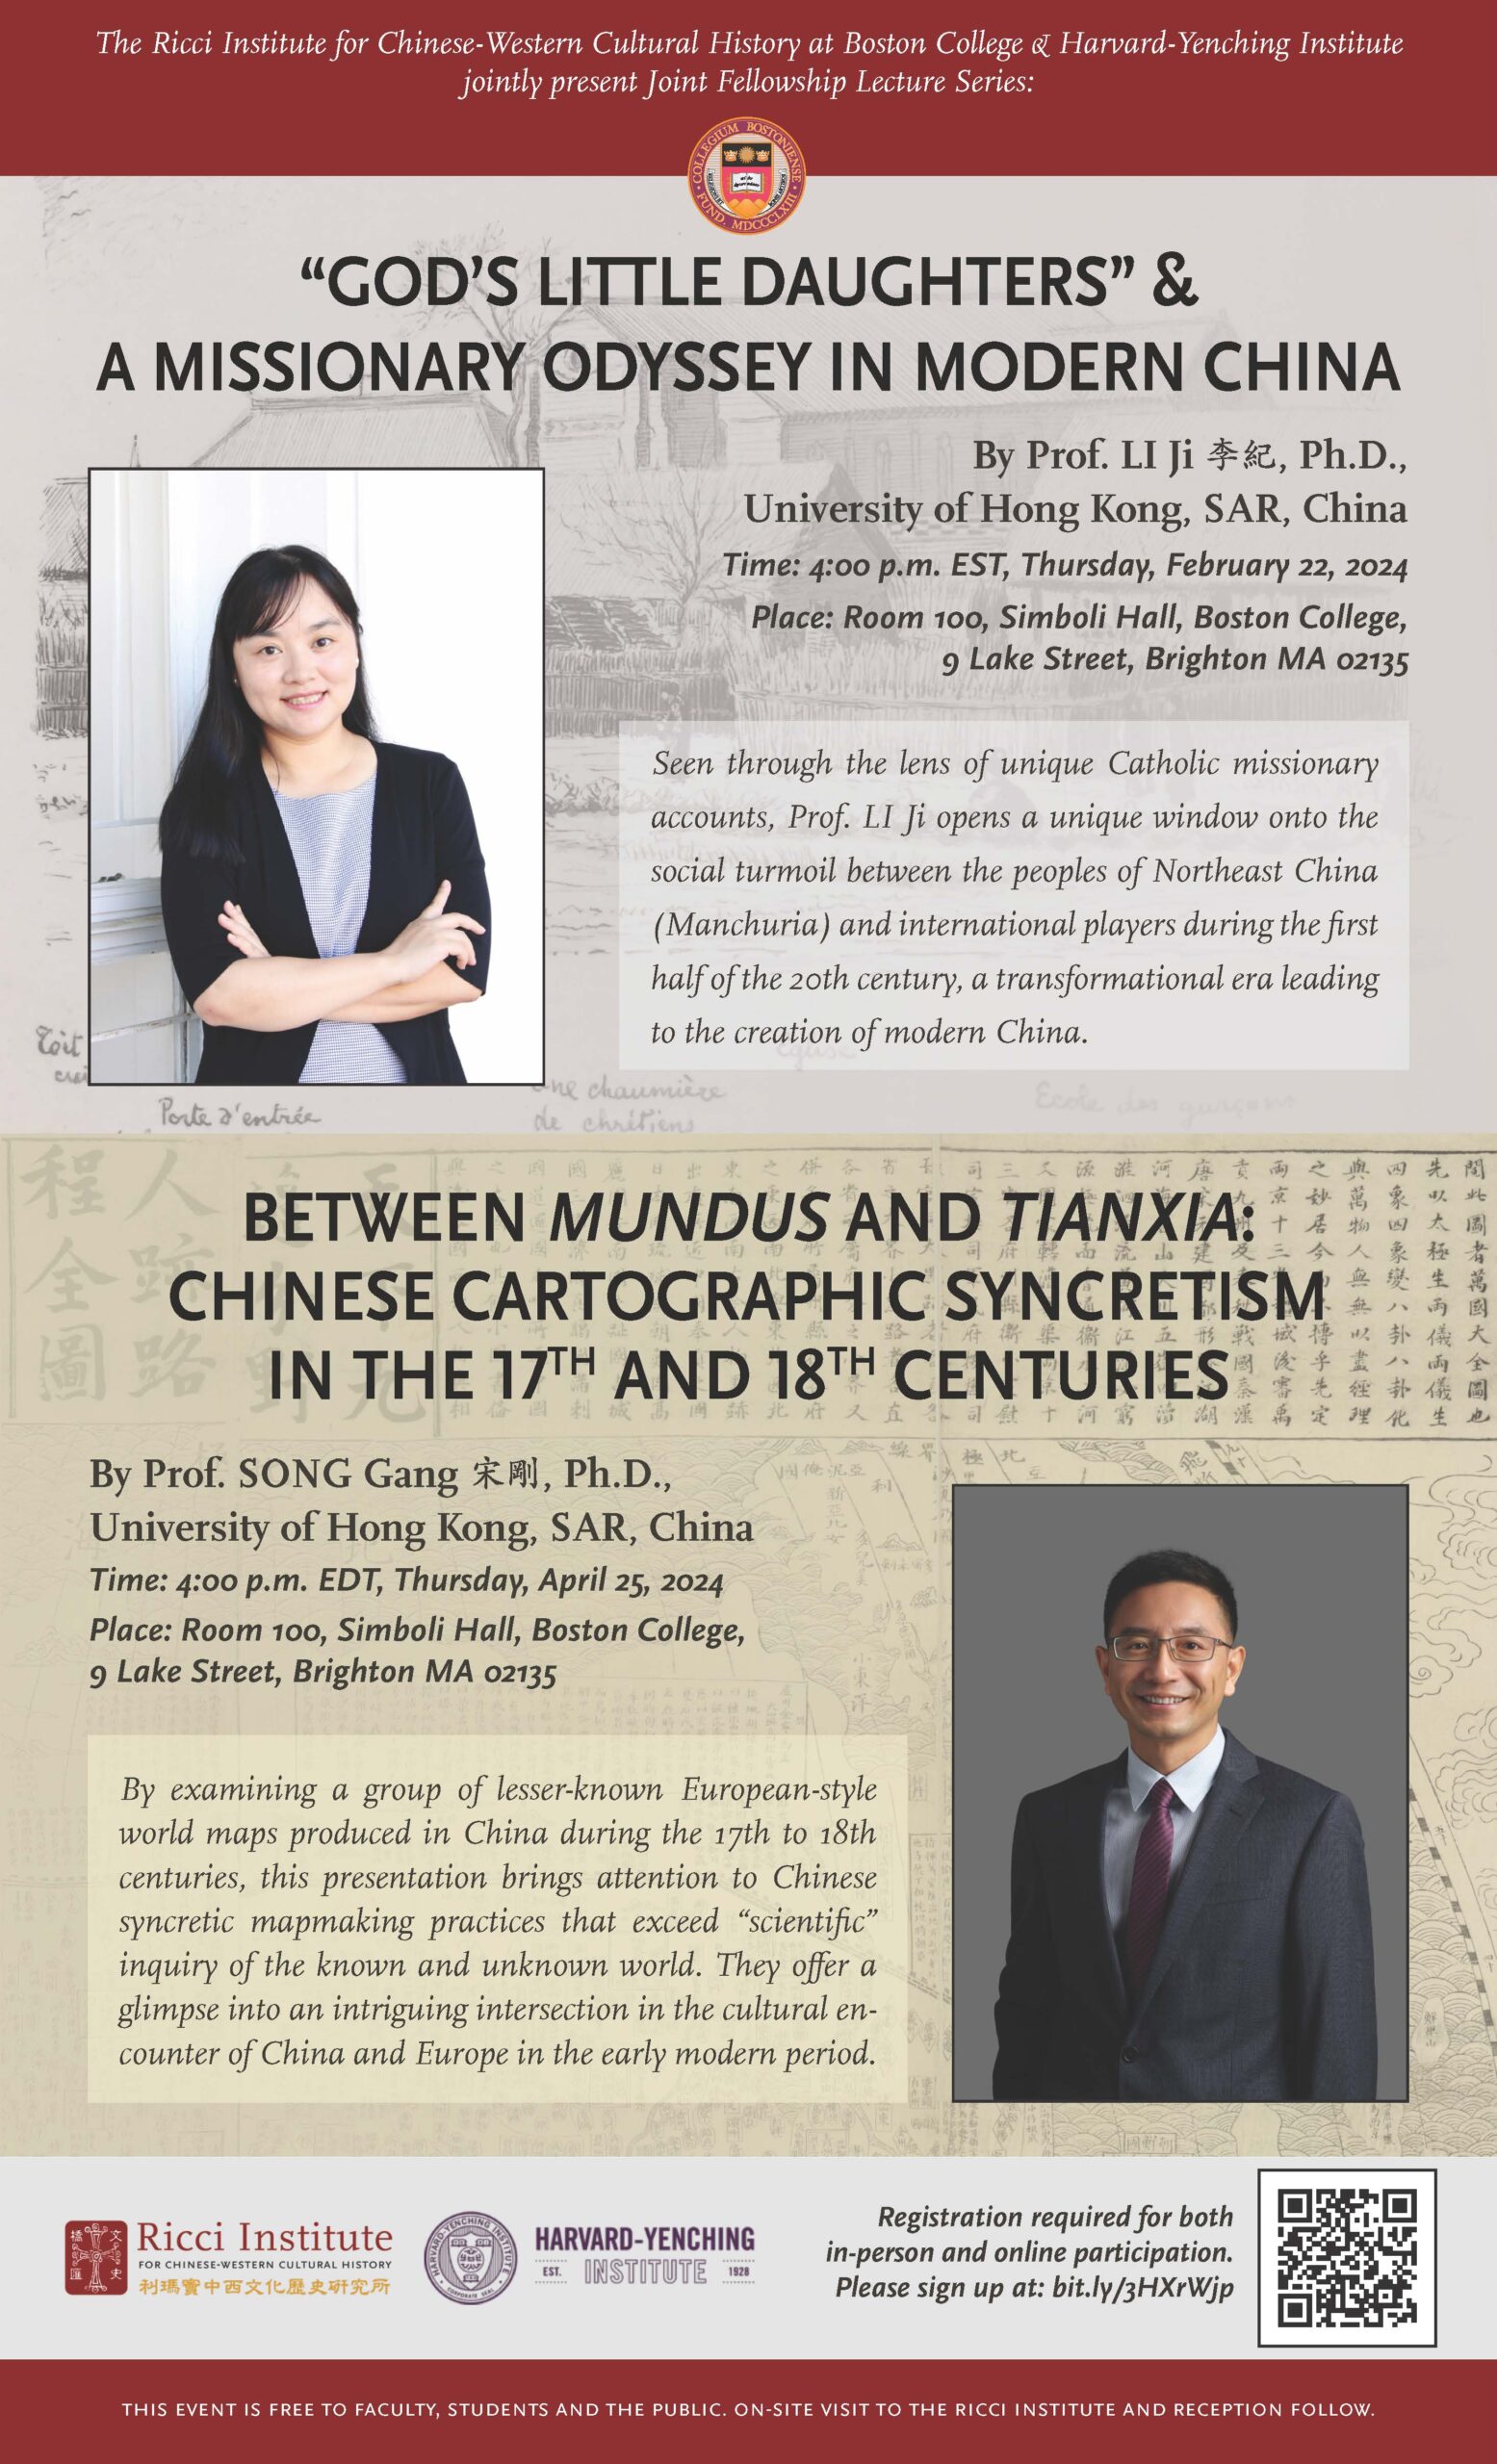 a flyer with pictures of two individuals and textual descriptions of their lectures